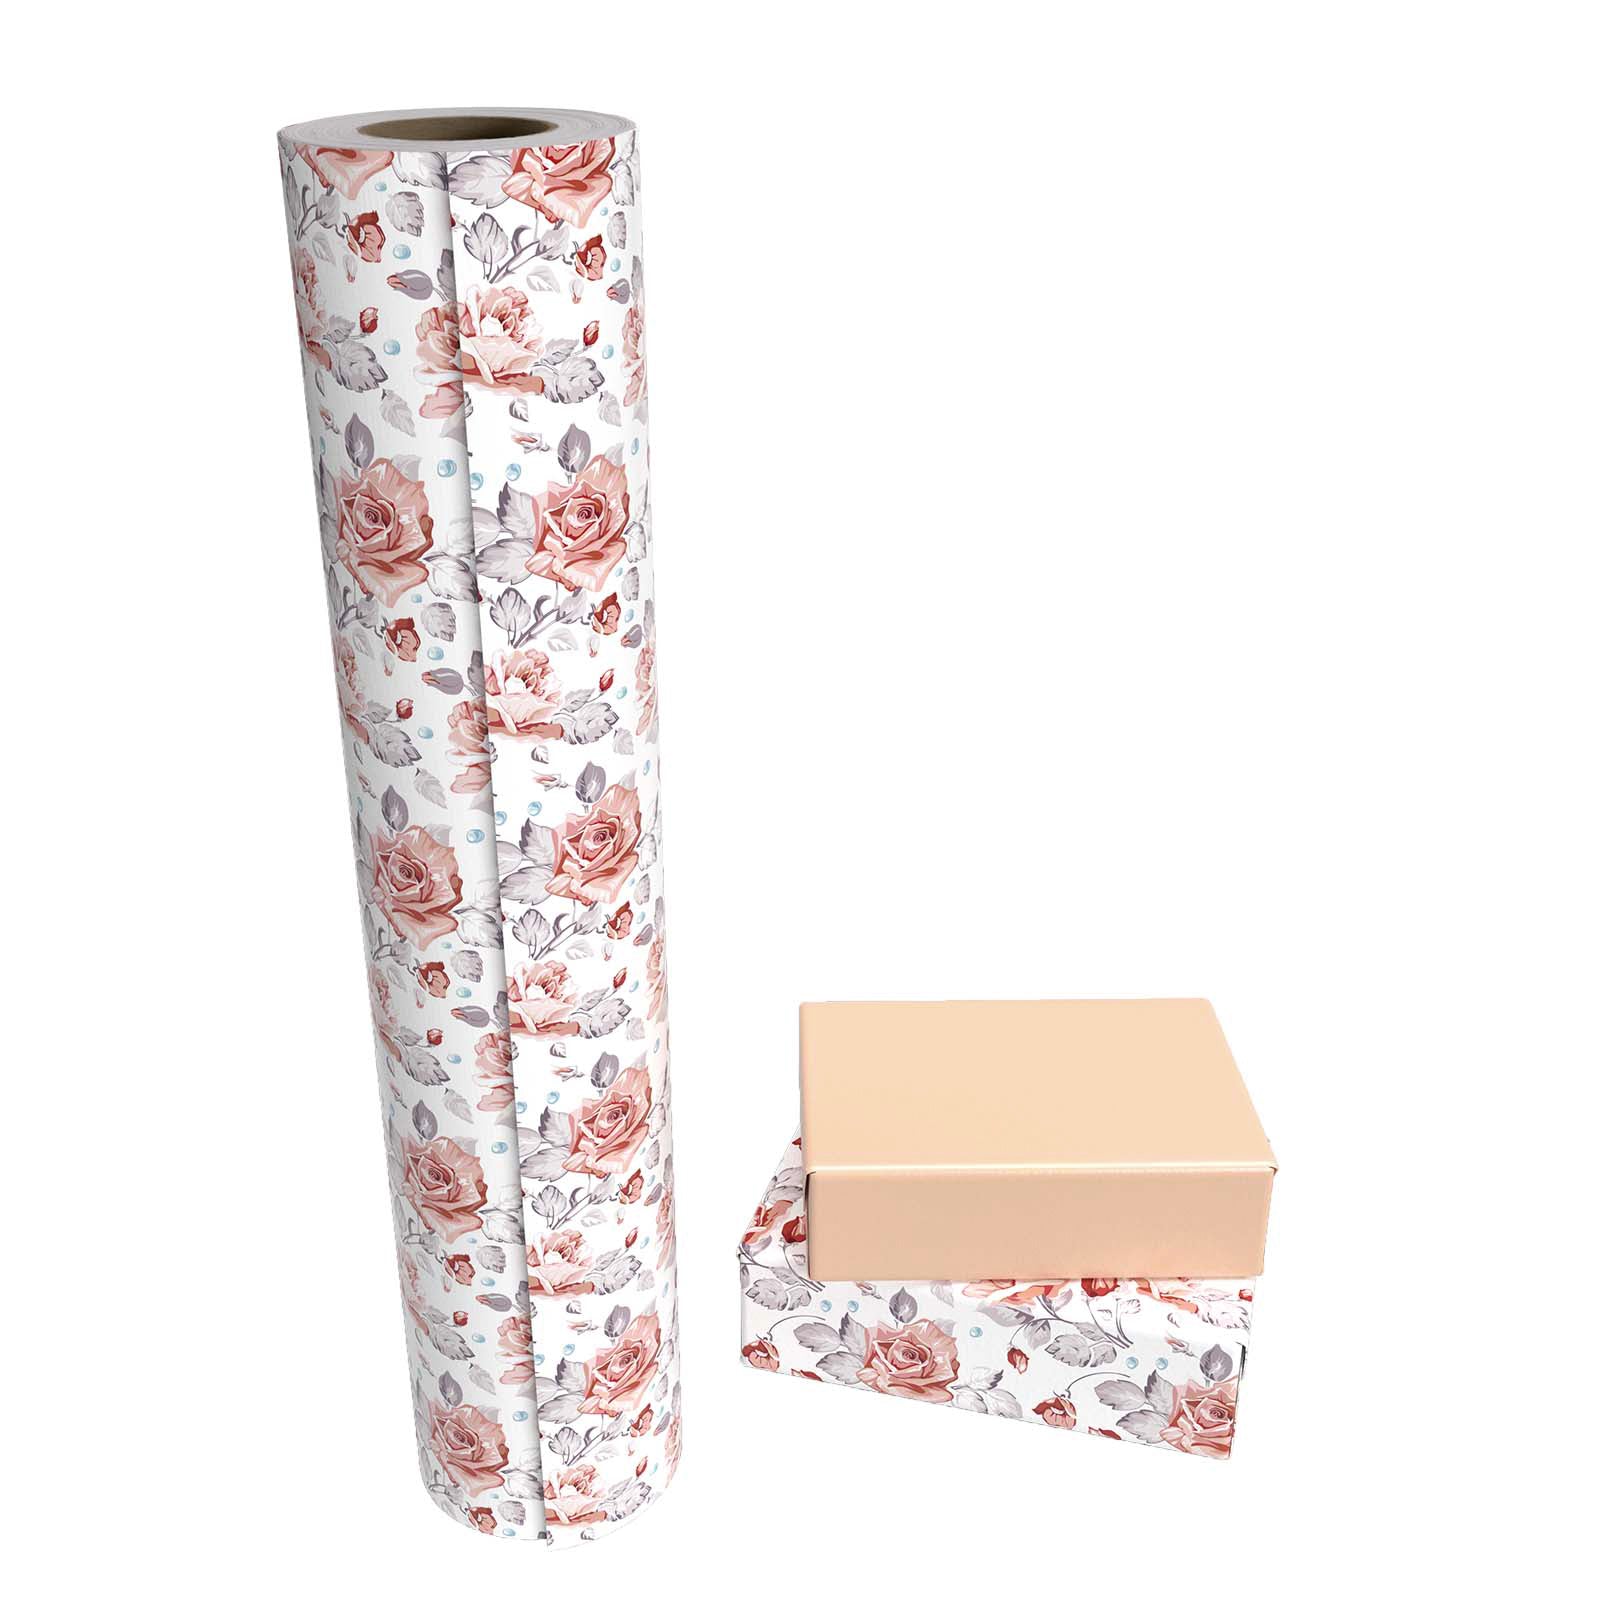 Watercolor Pink Rose Wrapping Paper with Peach Color Jumbo Roll Wholesale WrapaholicWatercolor Pink Rose Wrapping Paper with Peach Color Jumbo Roll Wholesale Wrapaholic